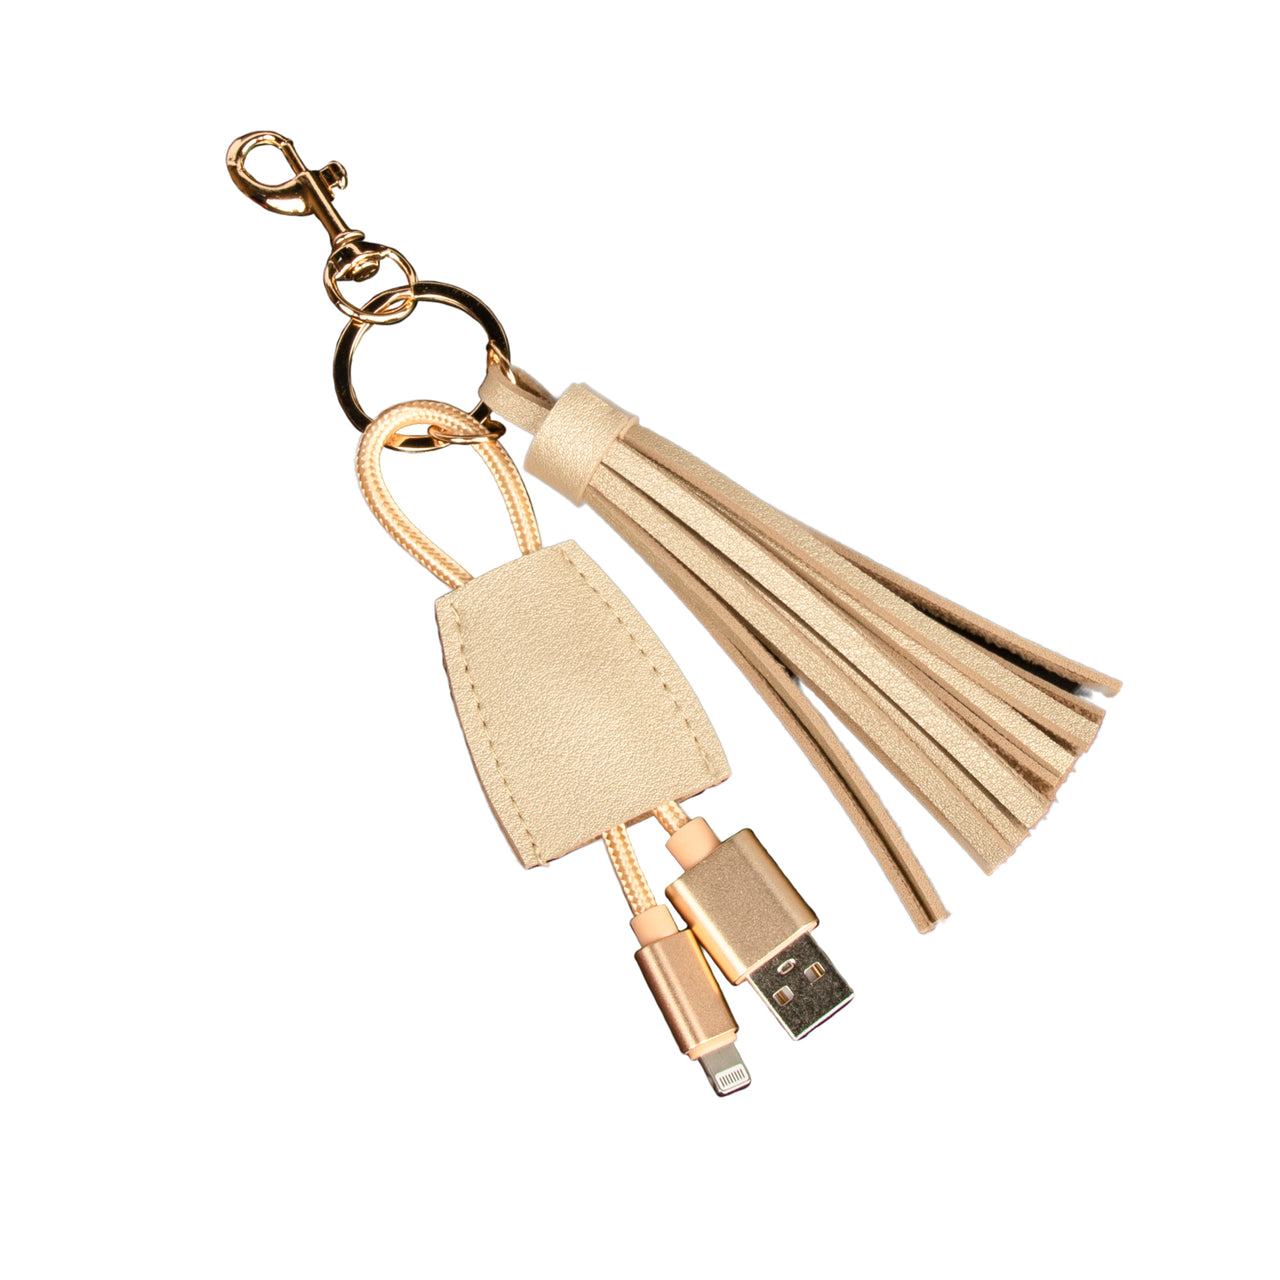 HOVEOX 20 Pieces 3.9 inch Faux Leather Tassel Bulk Keychain